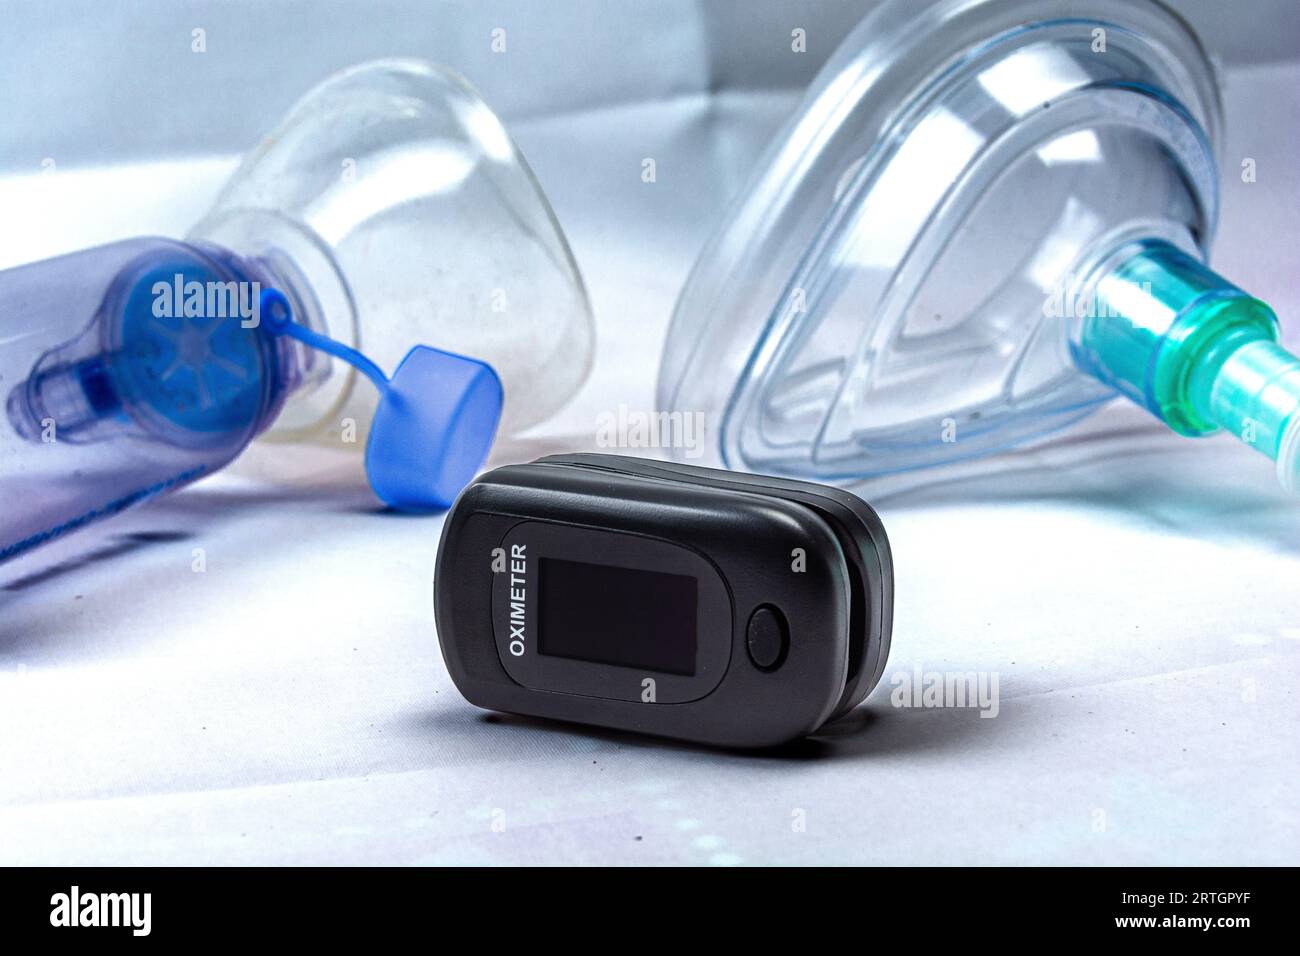 Digital pulse oximeter photographed on a white background in high key, next to an inhaler mask. Medical instruments. Stock Photo